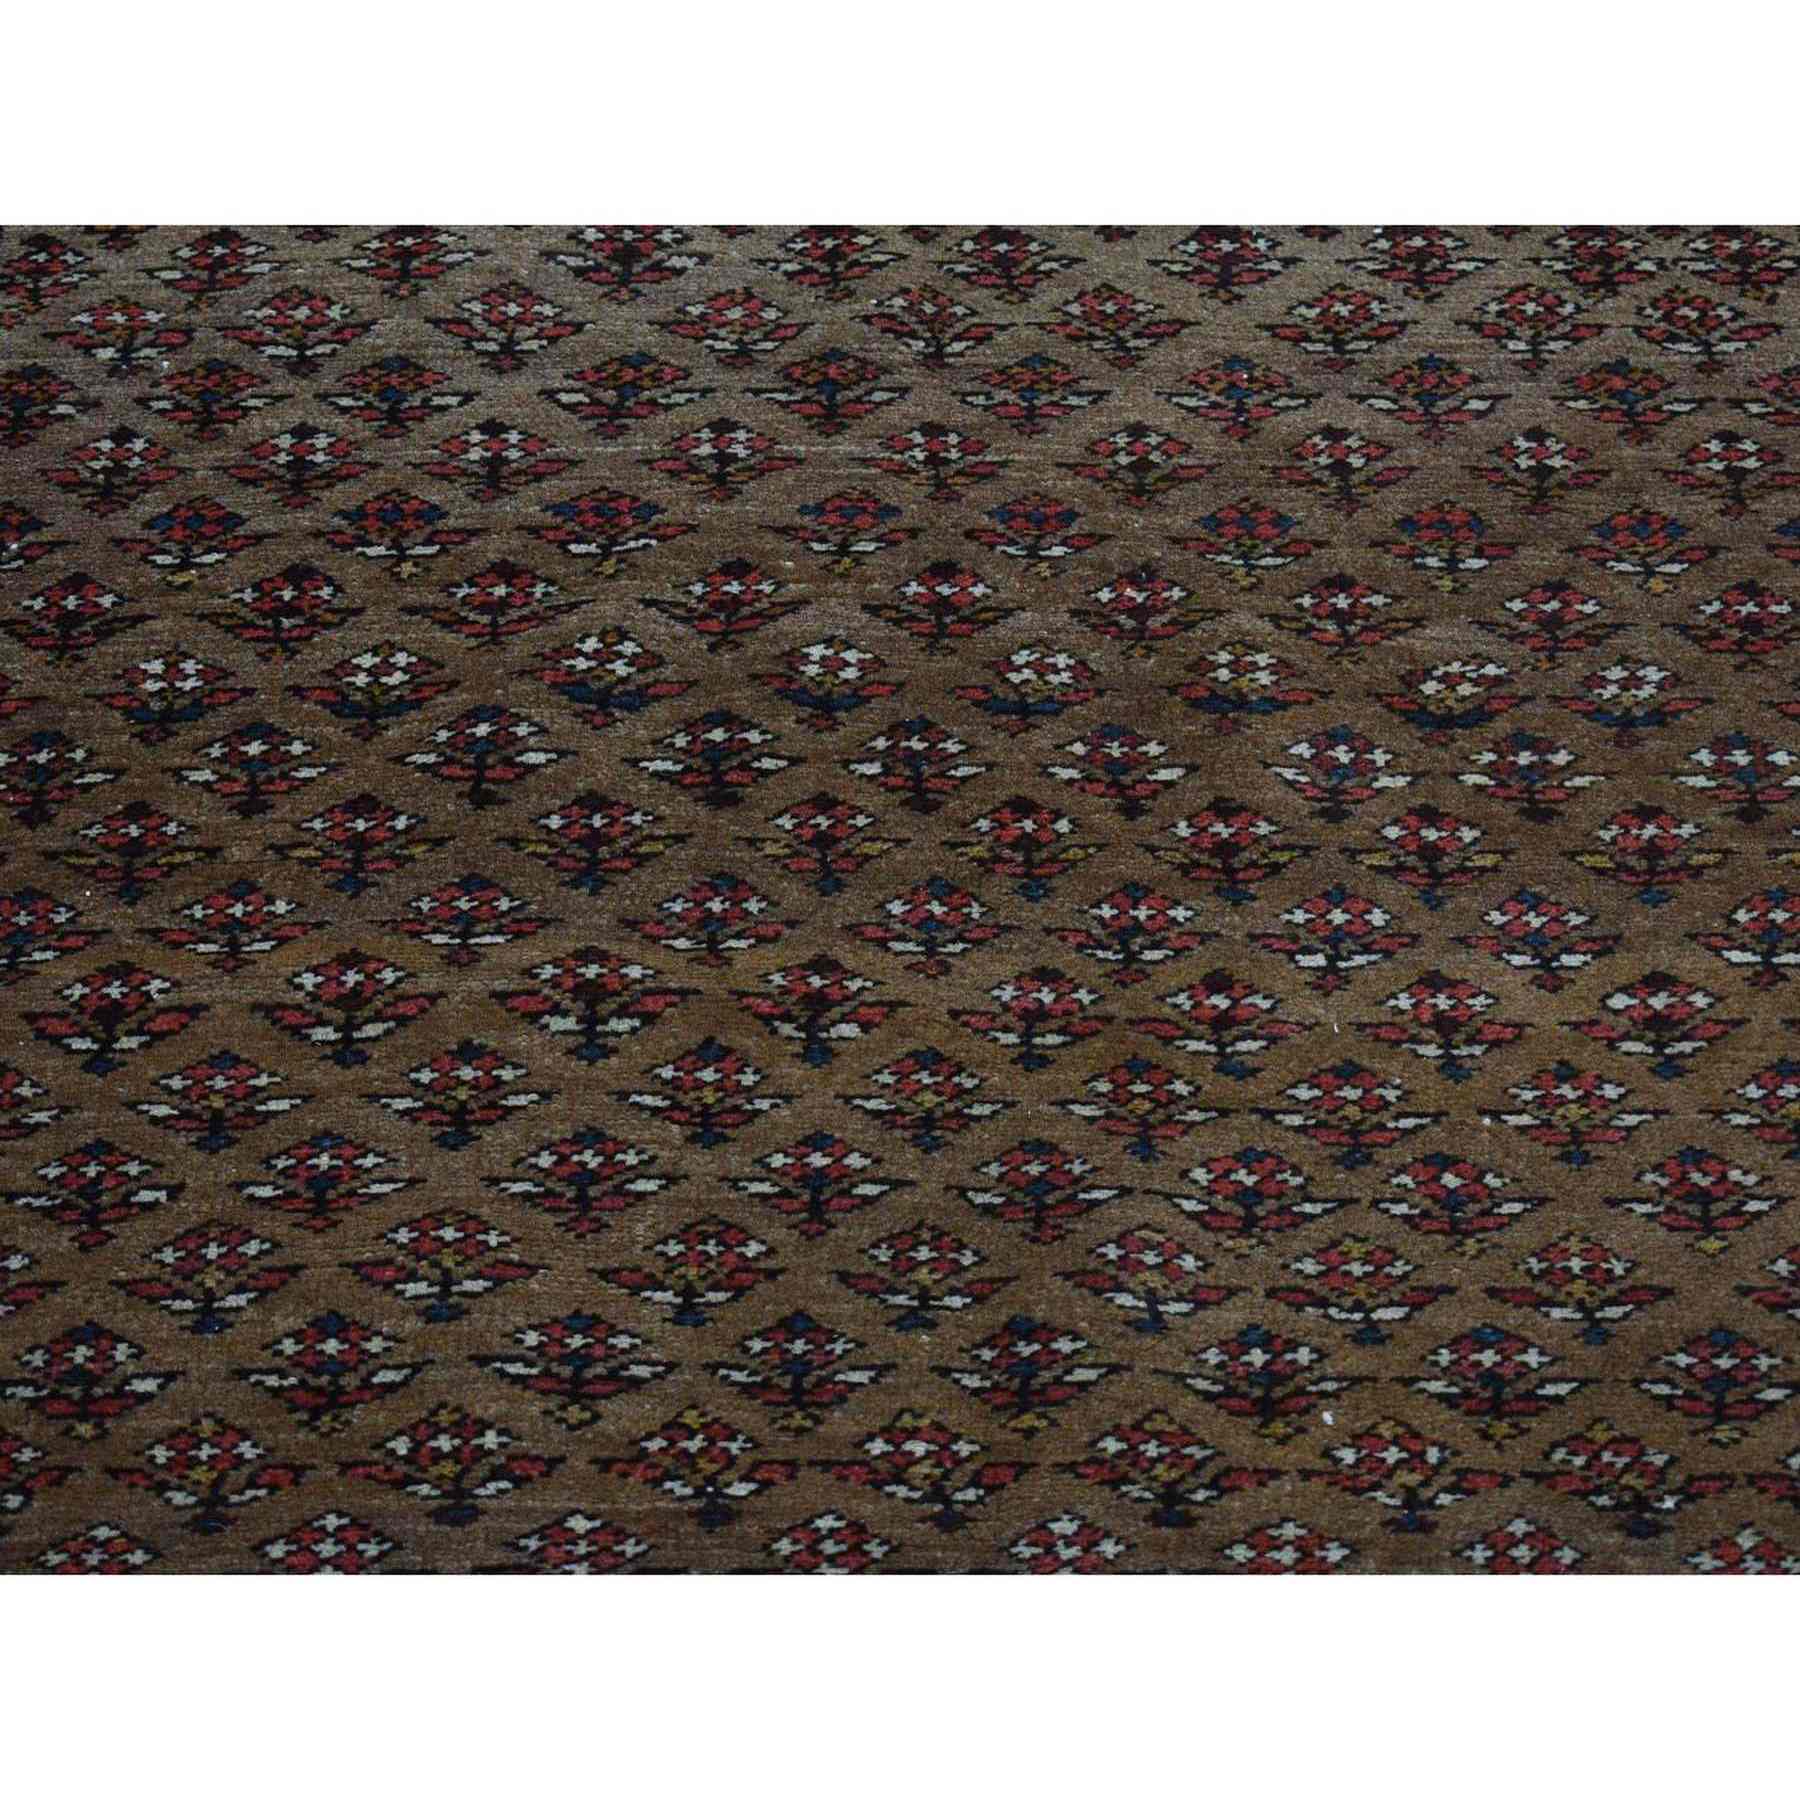 Antique-Hand-Knotted-Rug-400370